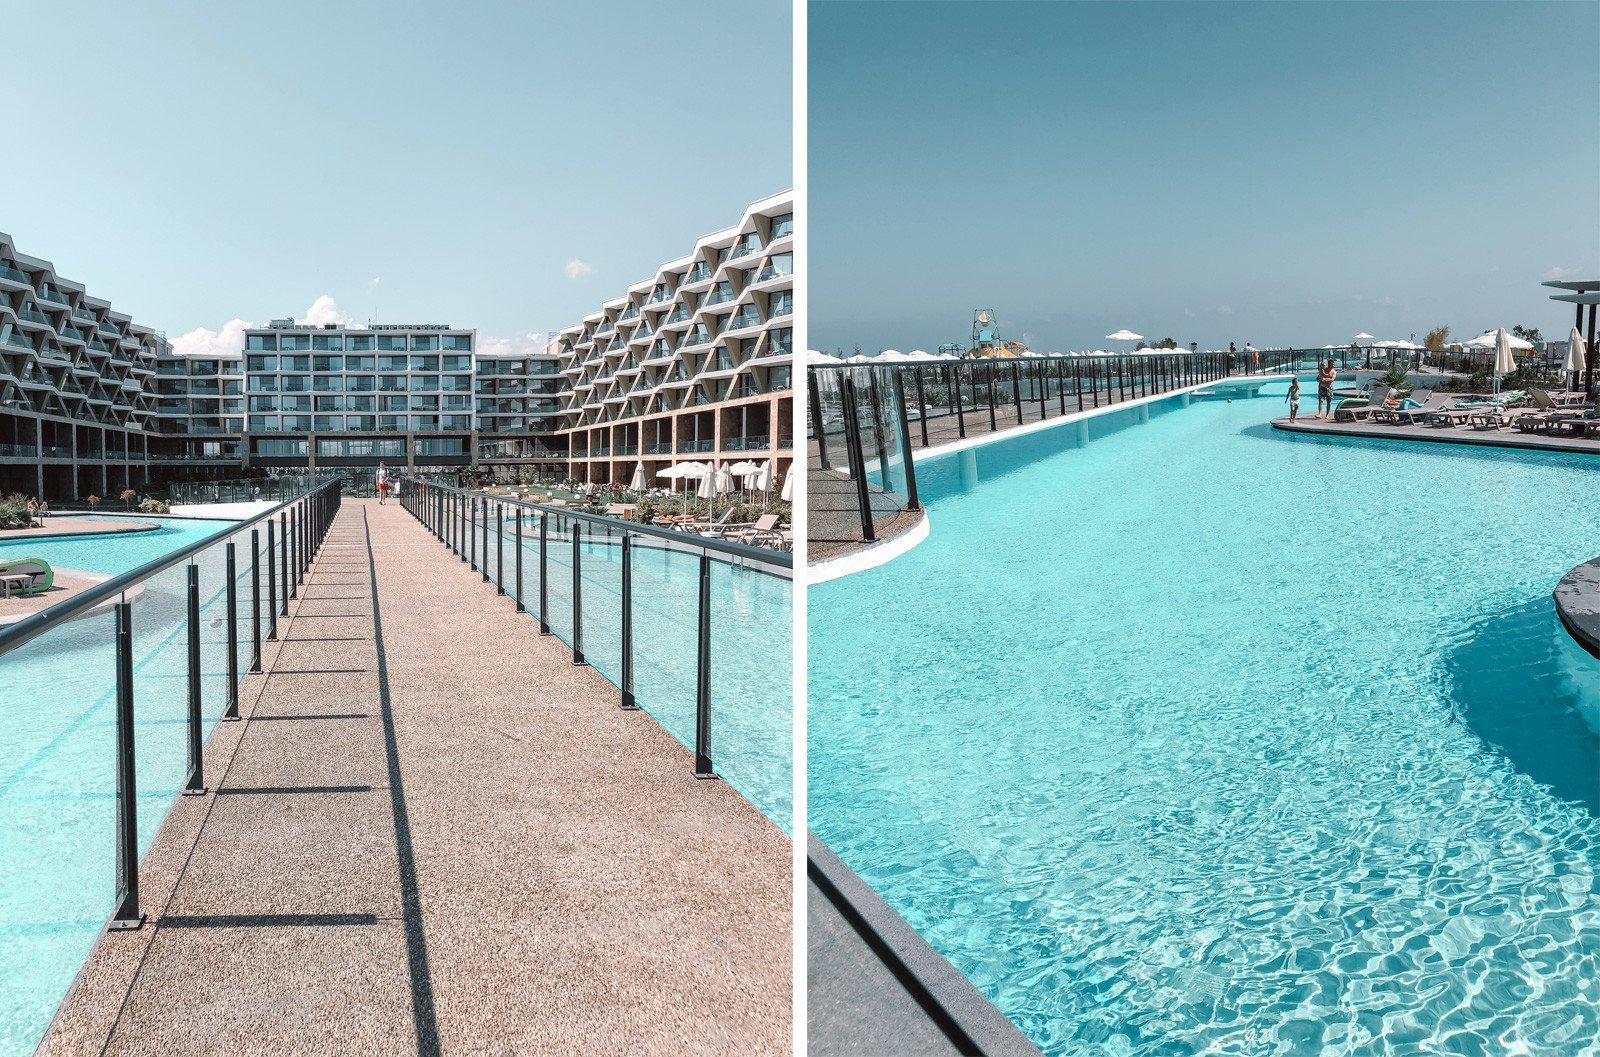 The pool area at Wave Resort, Pomorie, Bulgaria